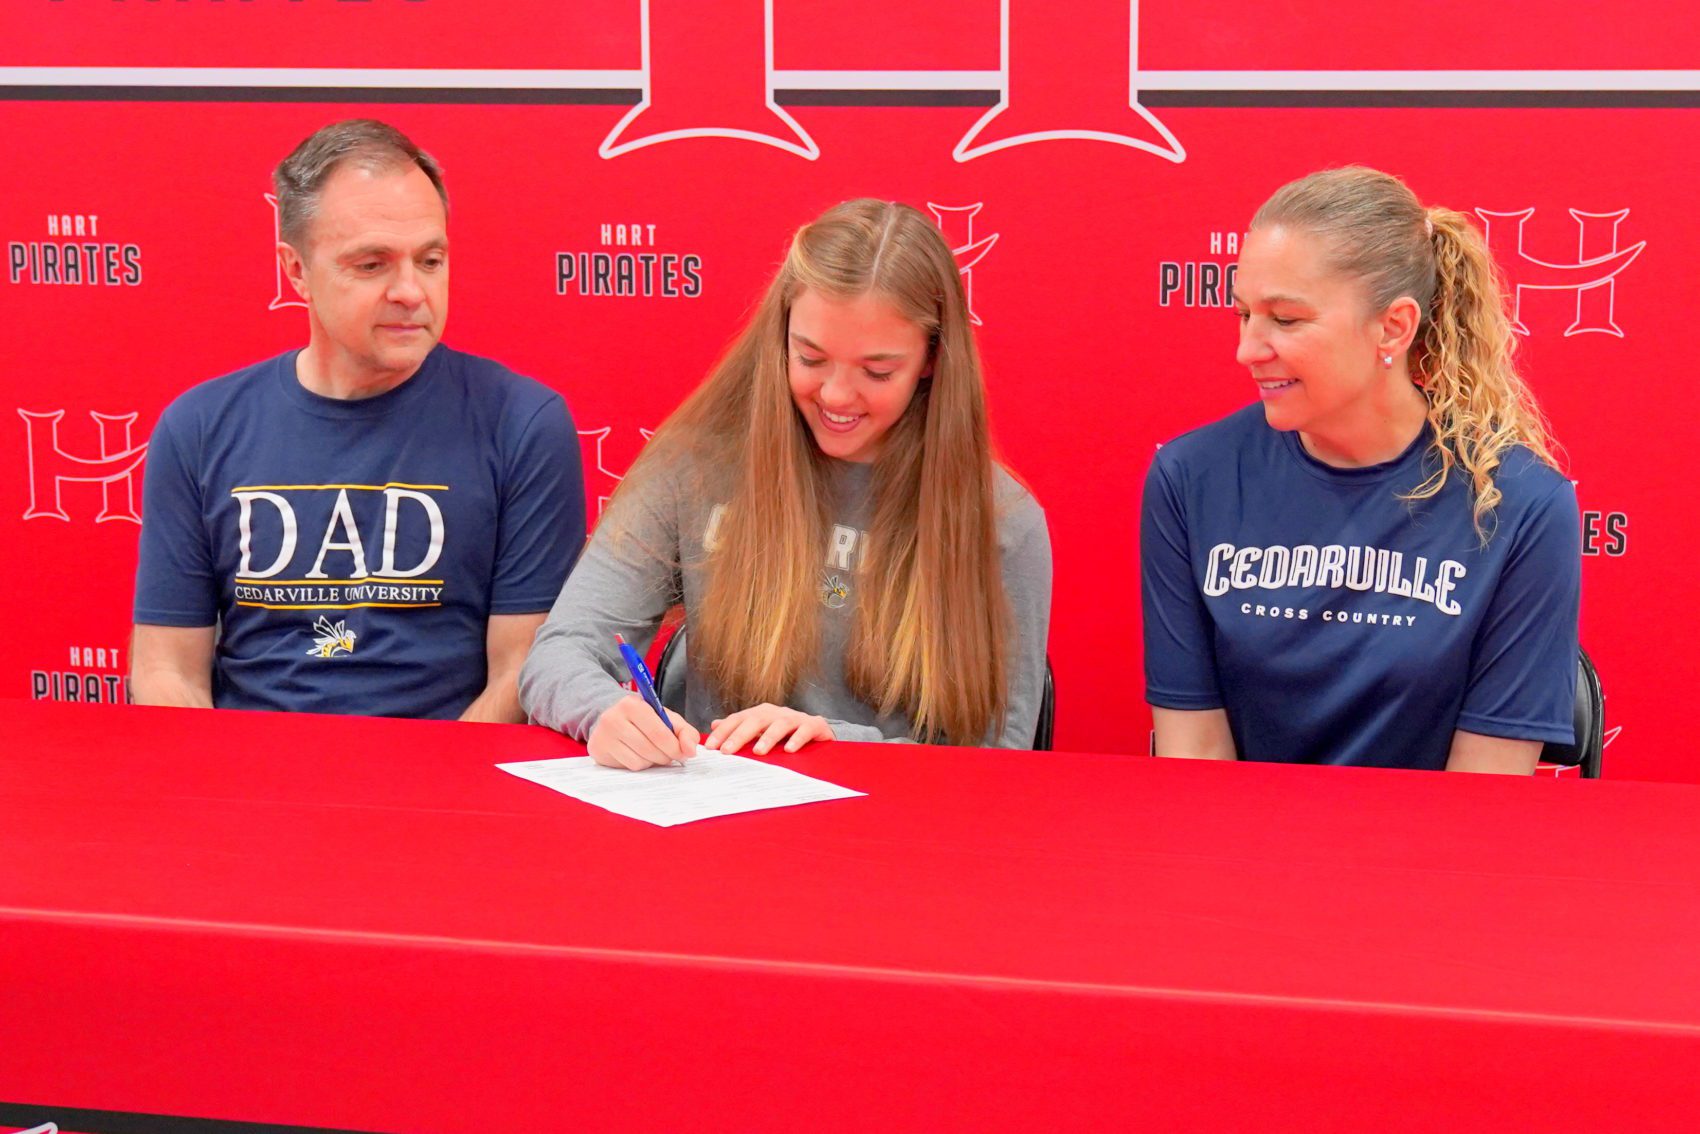 Enns will head to Cedarville University and continue her cross country and track-field career